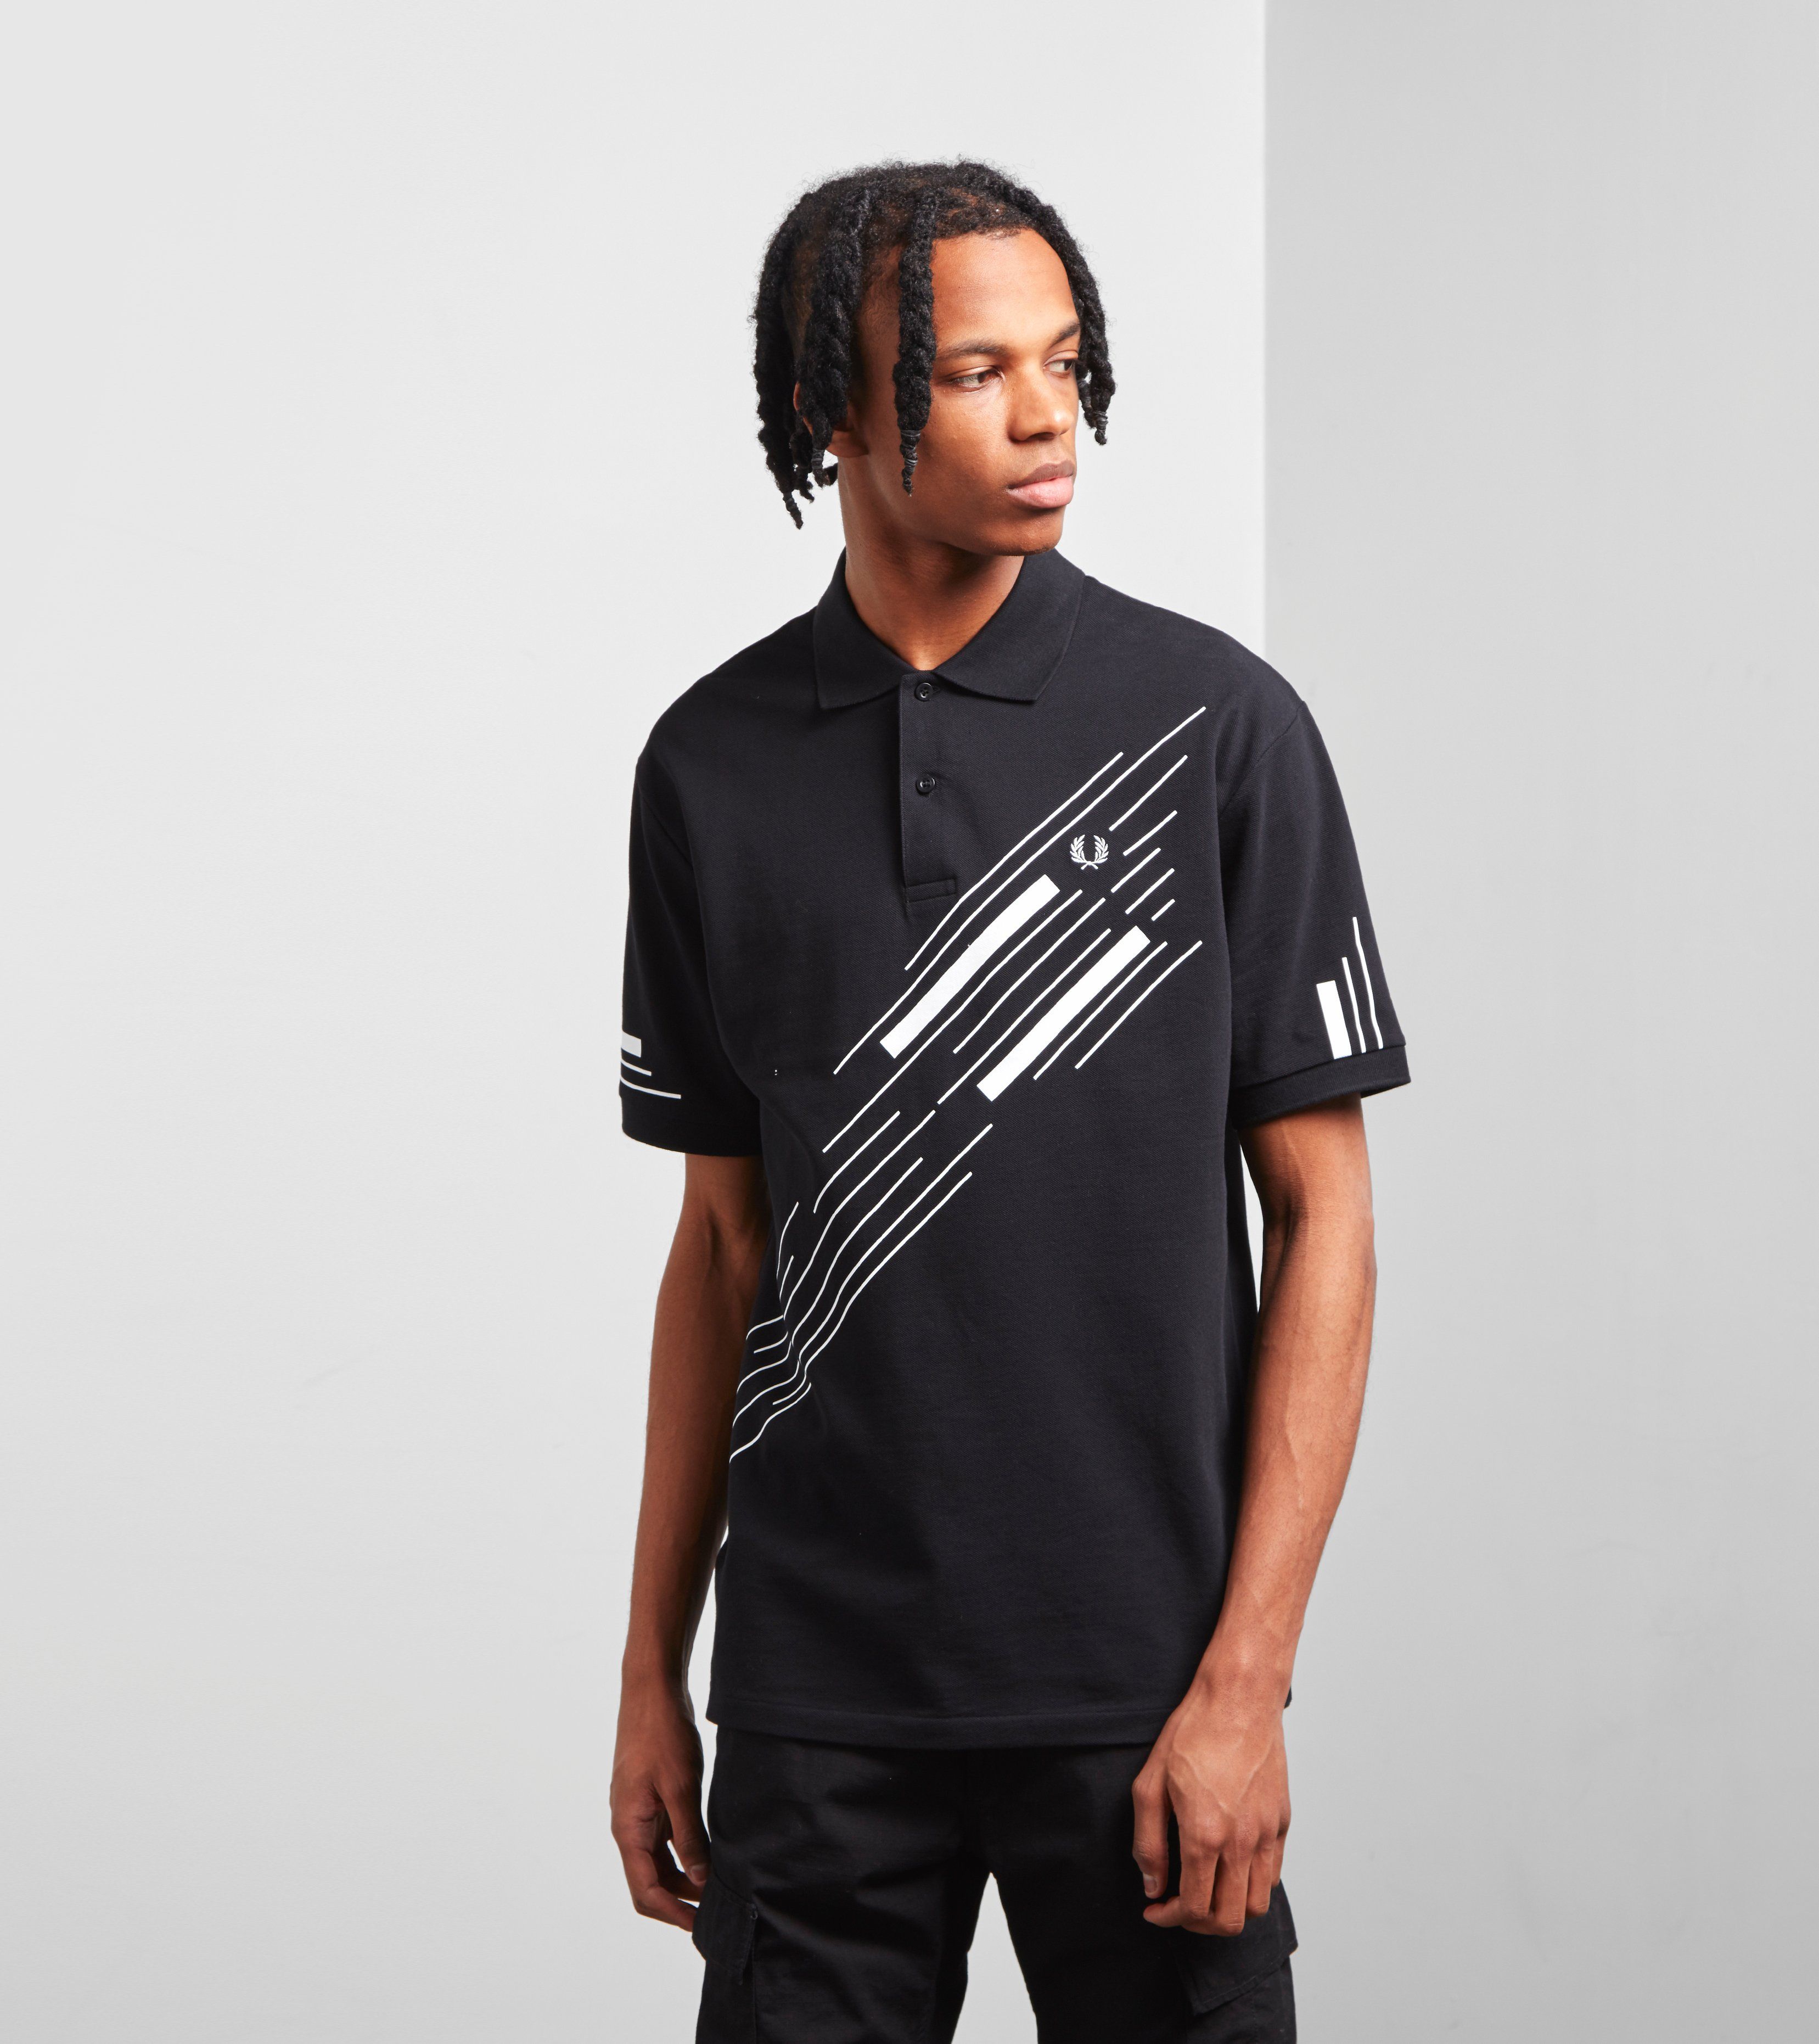 Fred Perry Polo Shirts Jd Sports - Prism Contractors & Engineers